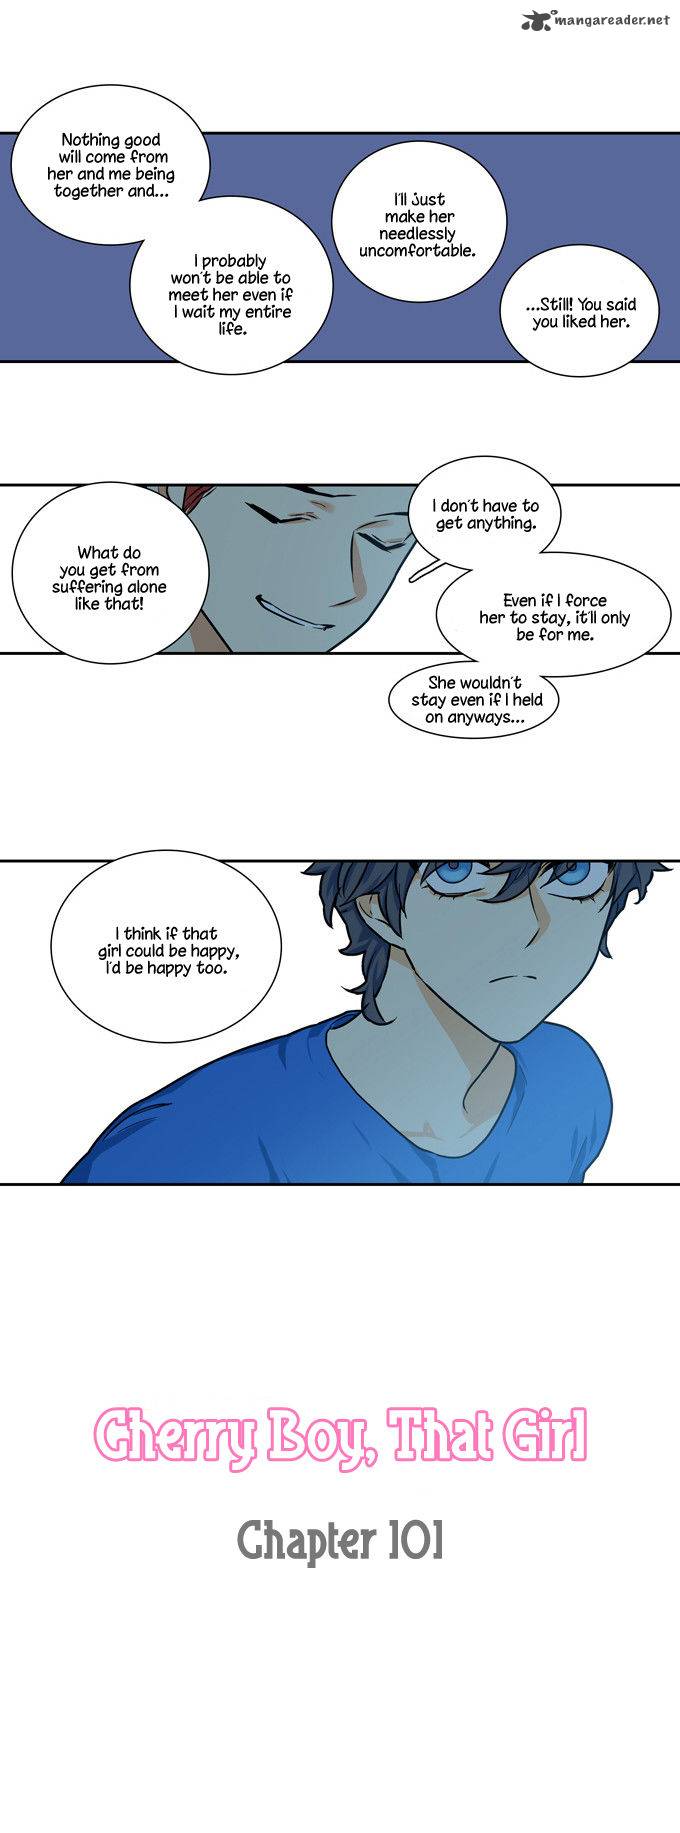 Cherry Boy That Girl Chapter 101 Page 2